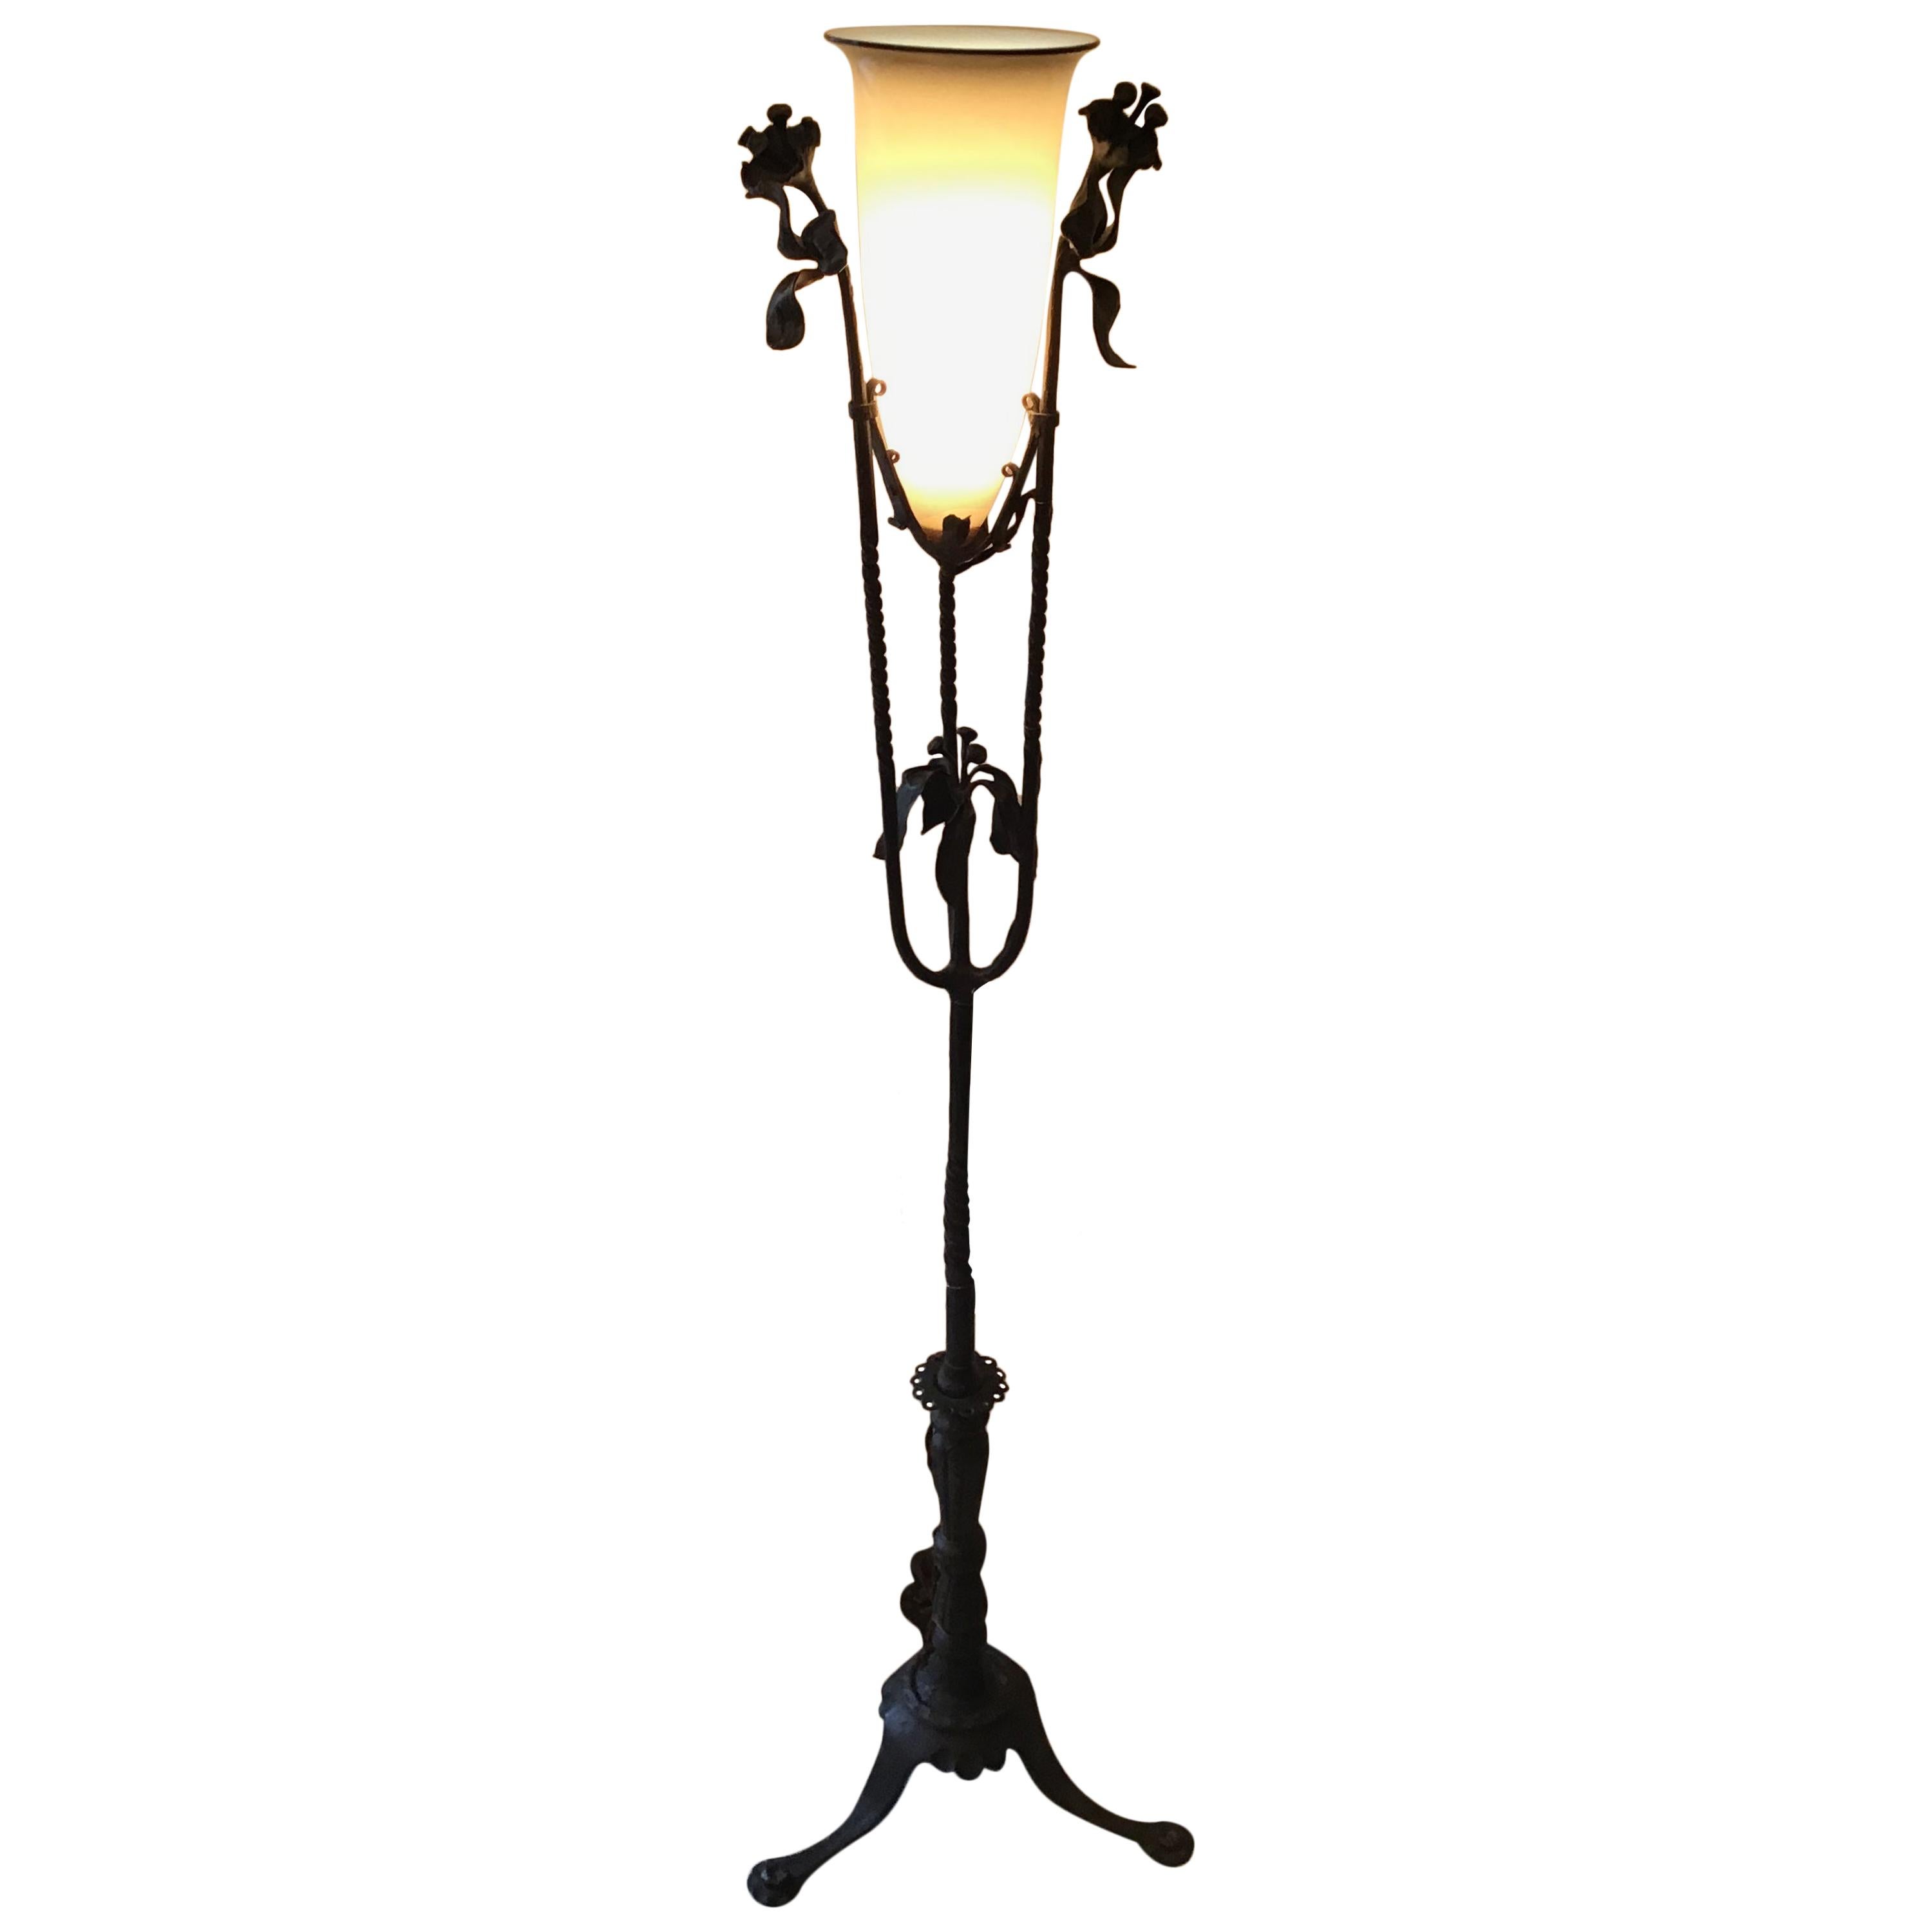 Rizzarda Floor Lamp Wrought Iron Murano Glass, 1930, Italy For Sale